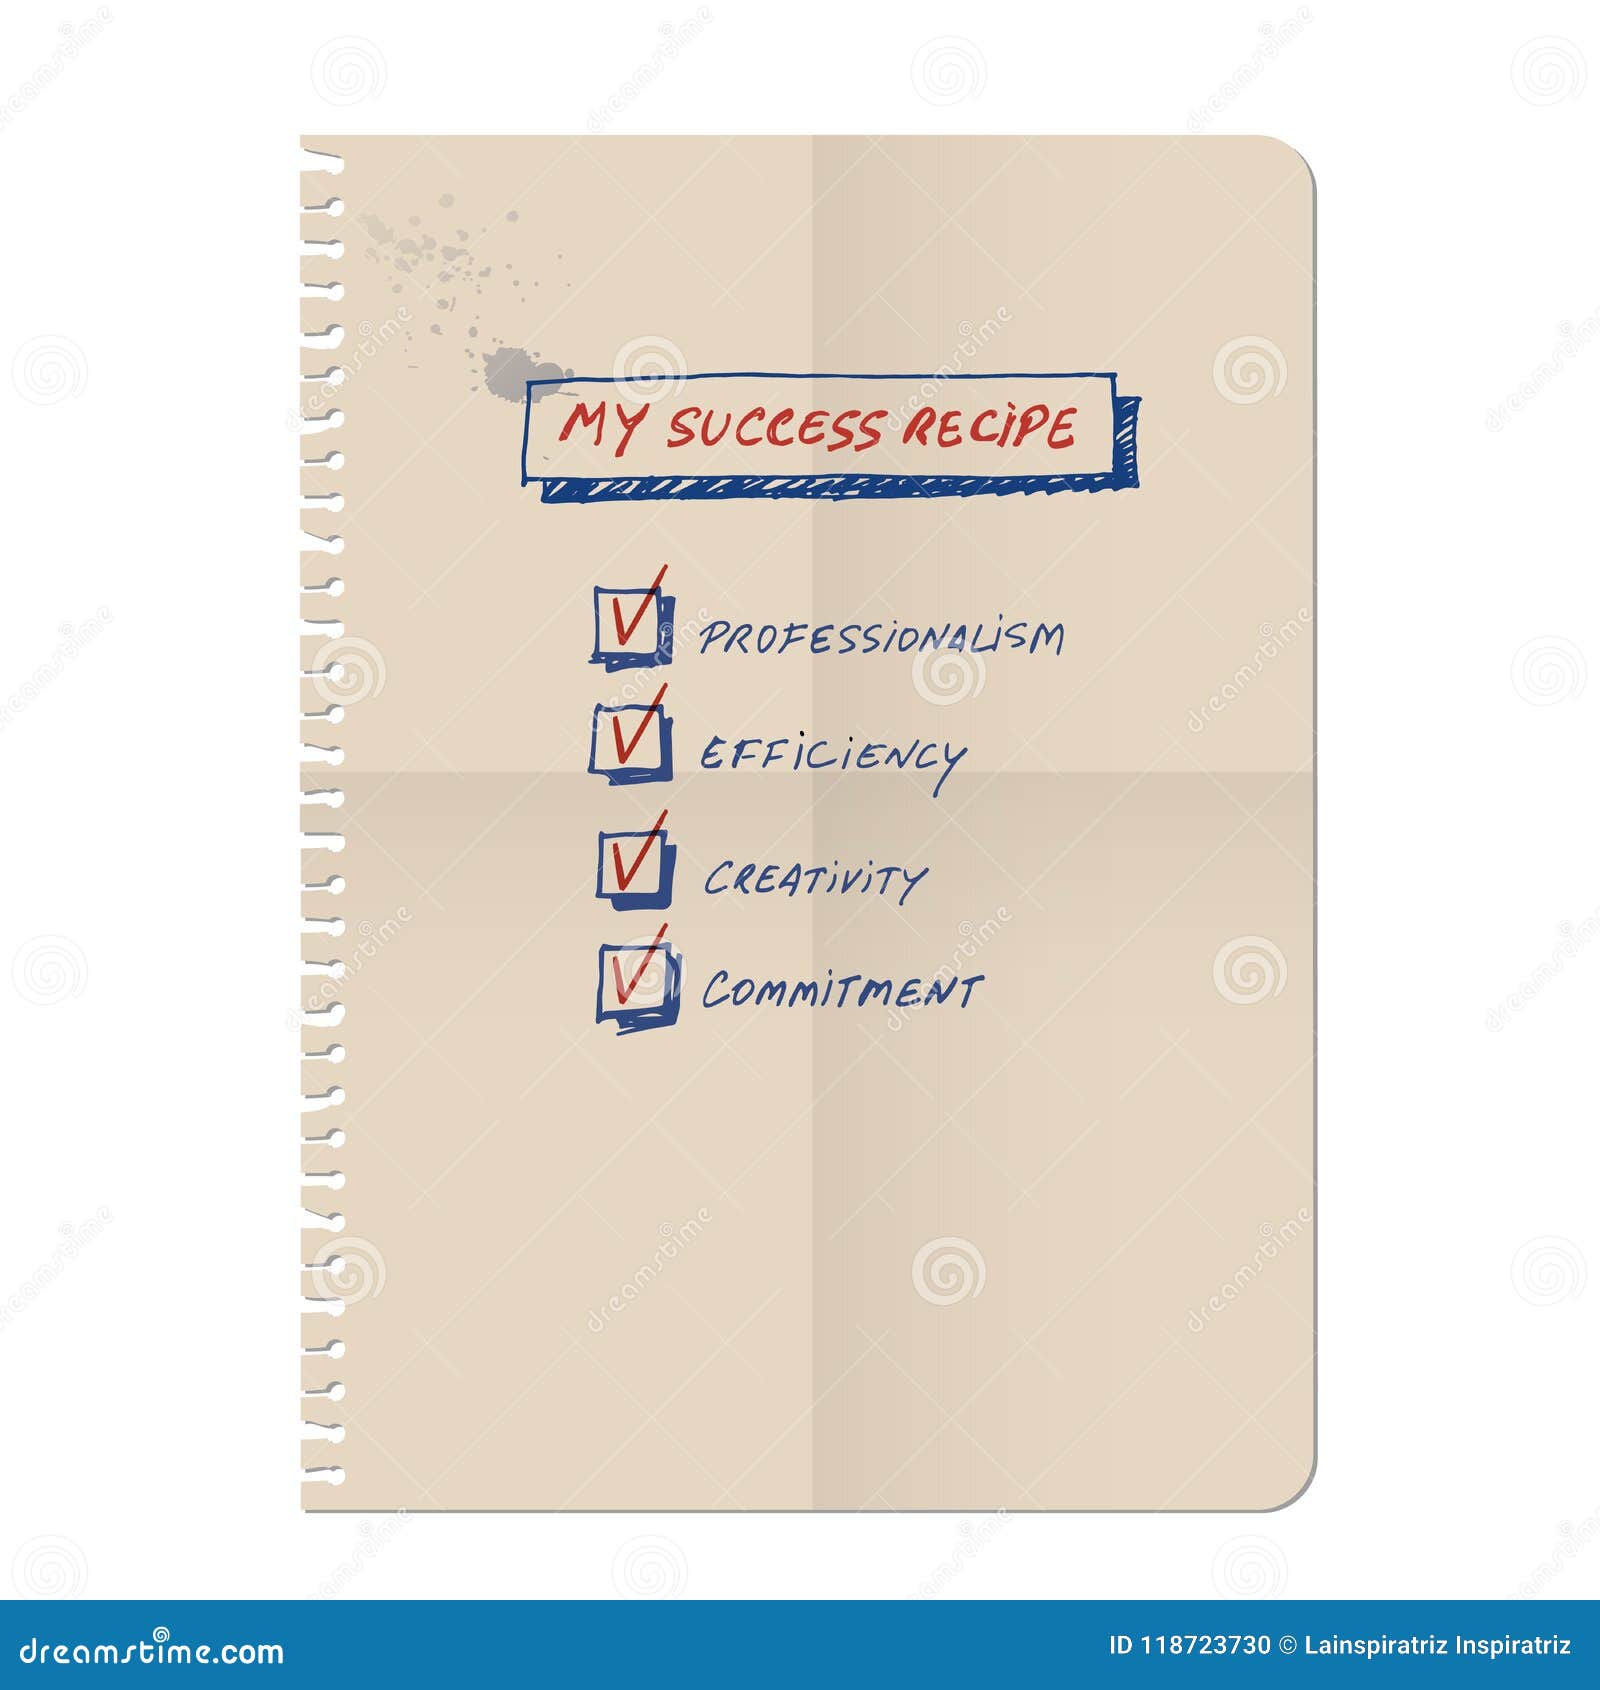 sucess recipe: list of requirements to achieve success